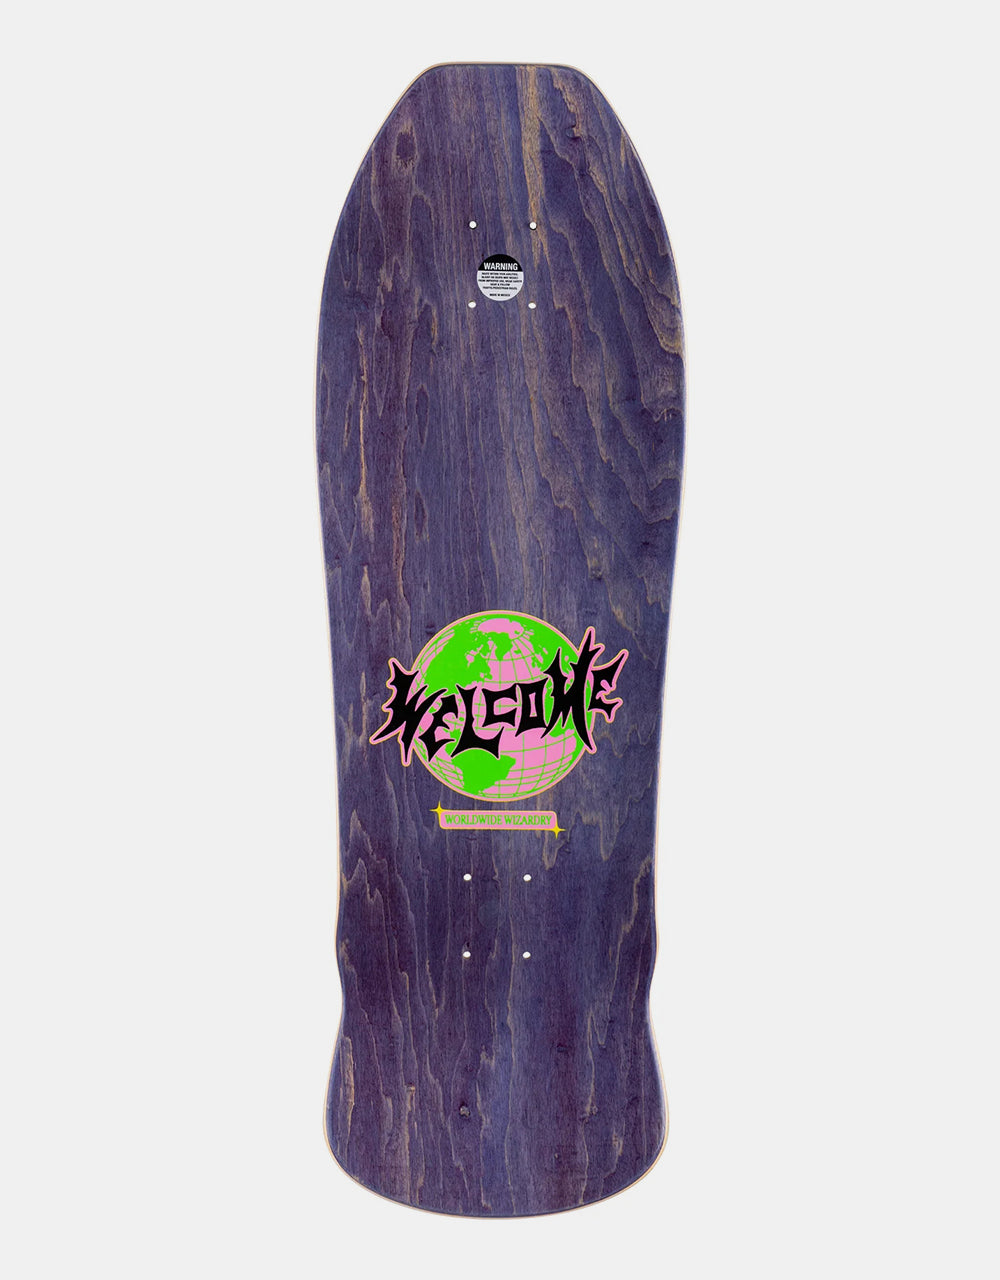 Welcome Super Simp on Early Grab Skateboard Deck - 10"